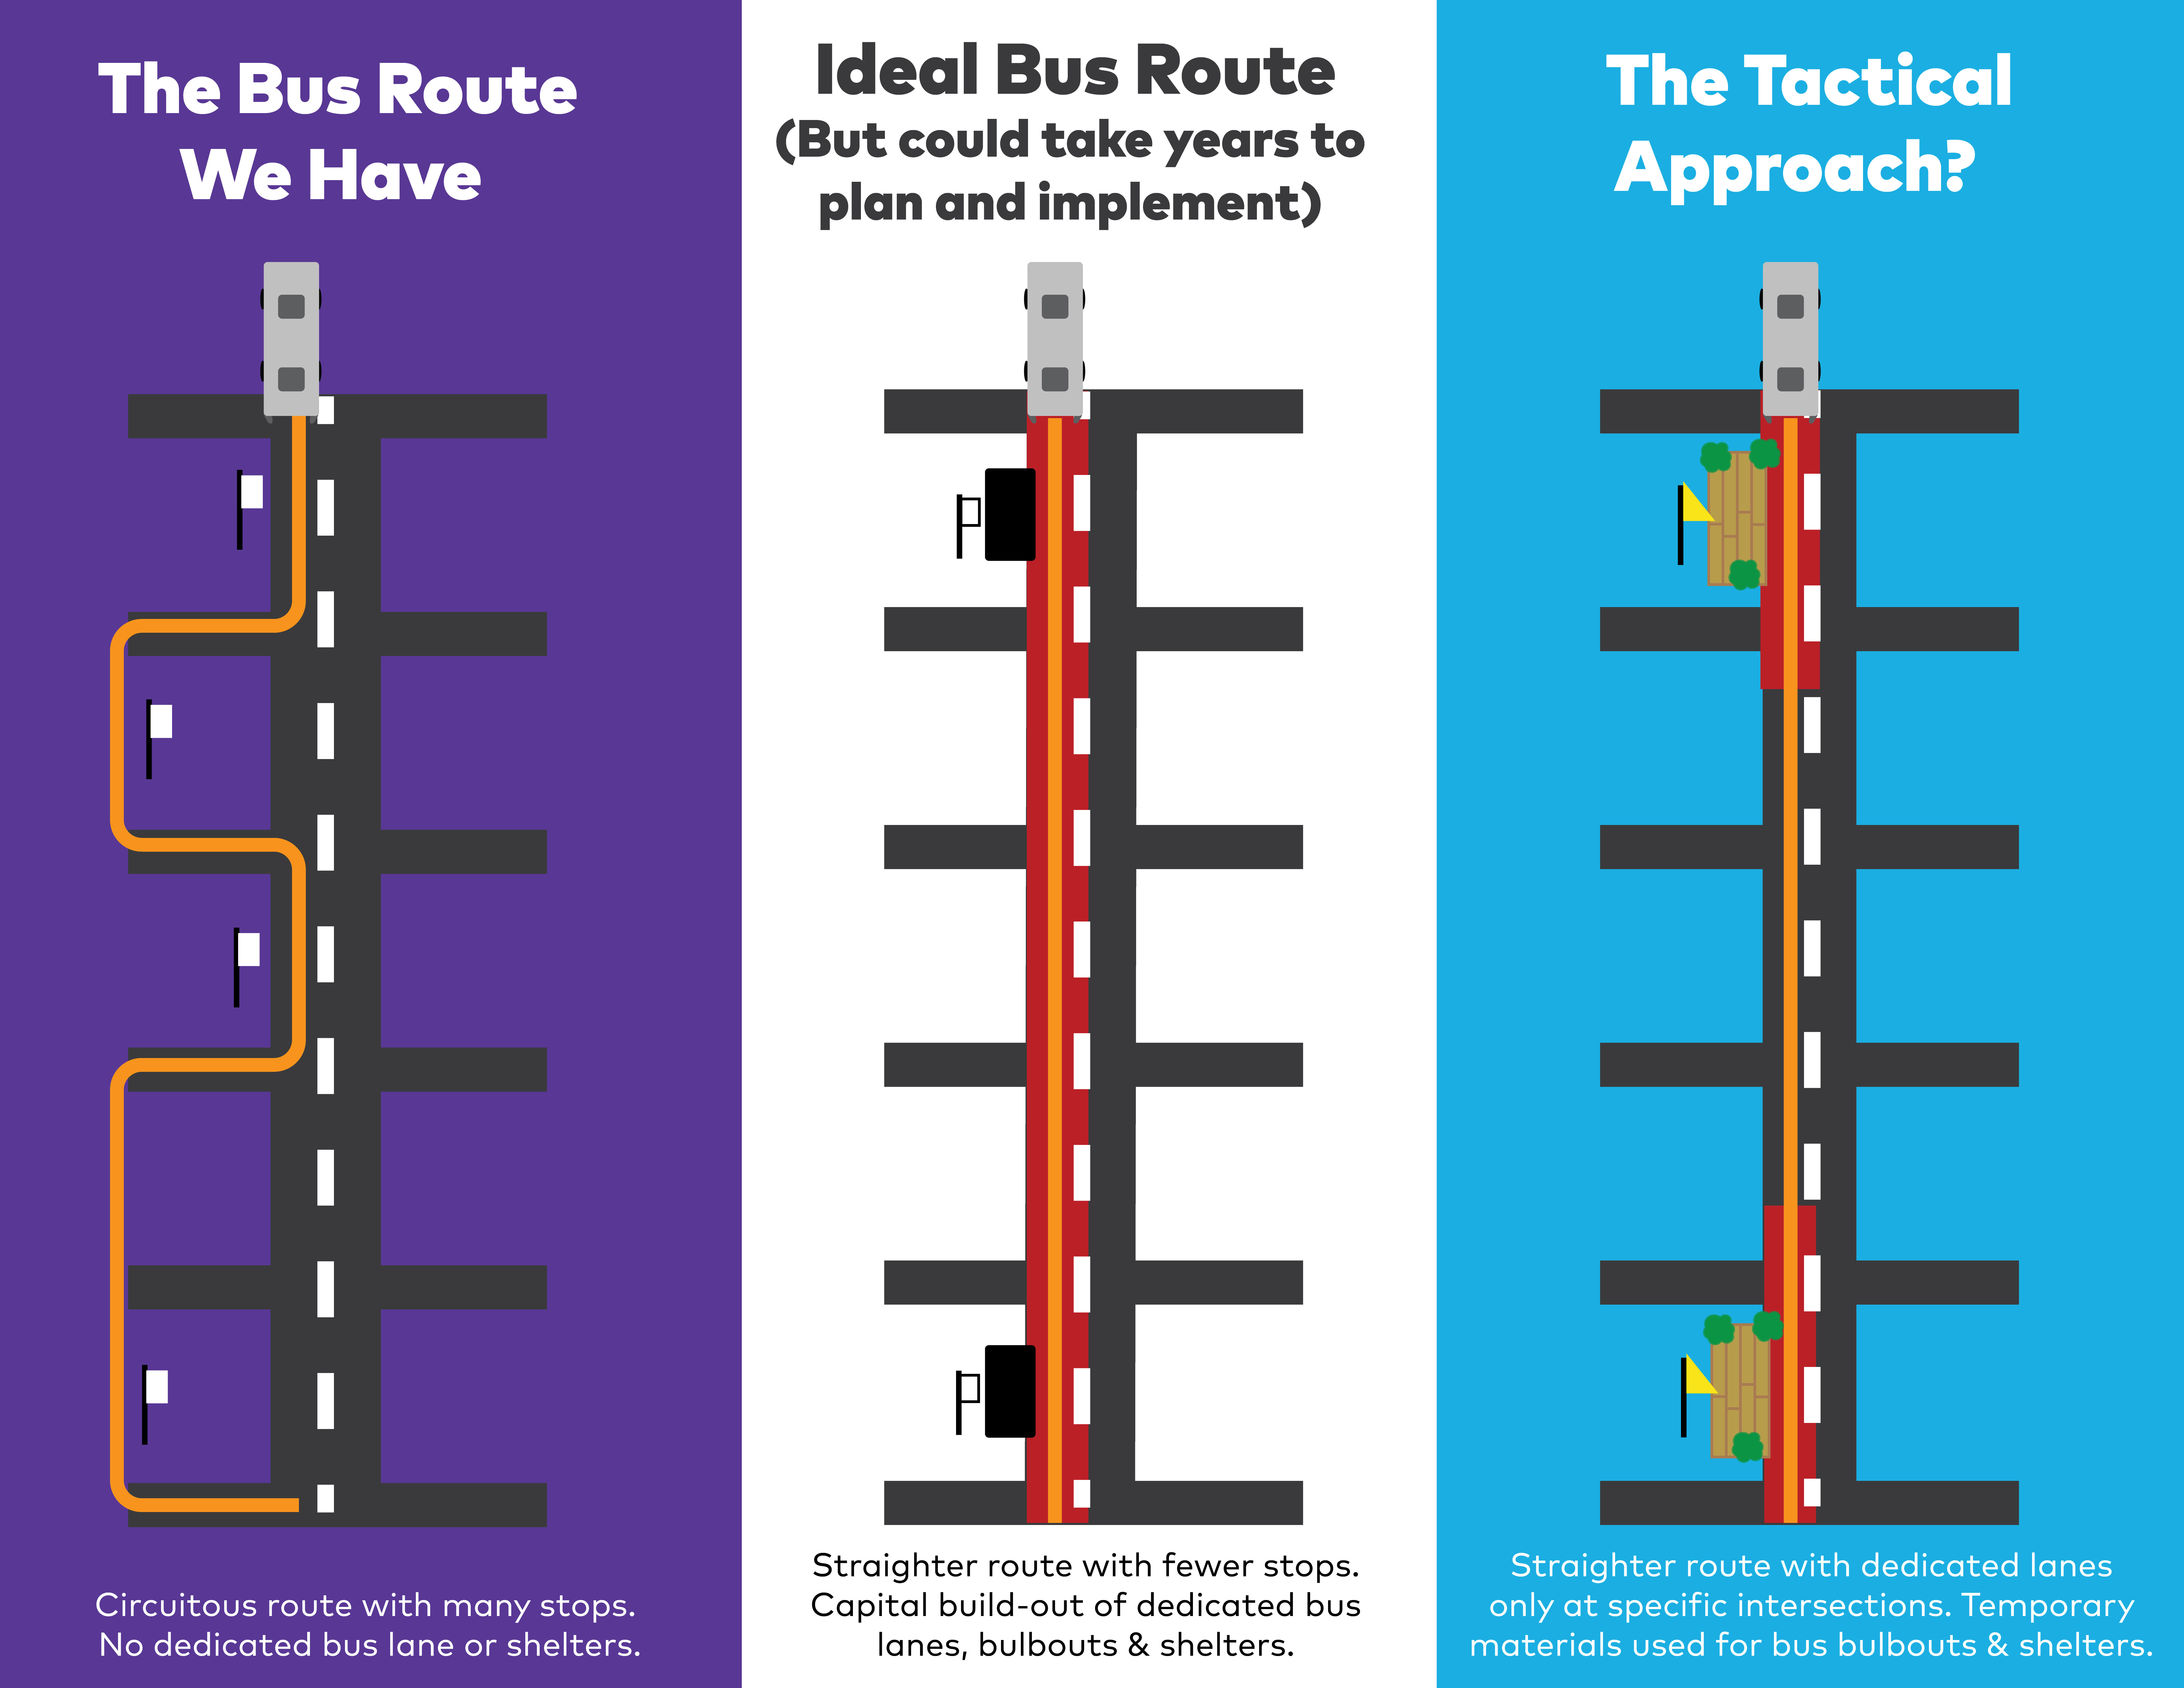 ZICLA TransitCenter: Why Tactical Transit is the Next Big Thing. 2